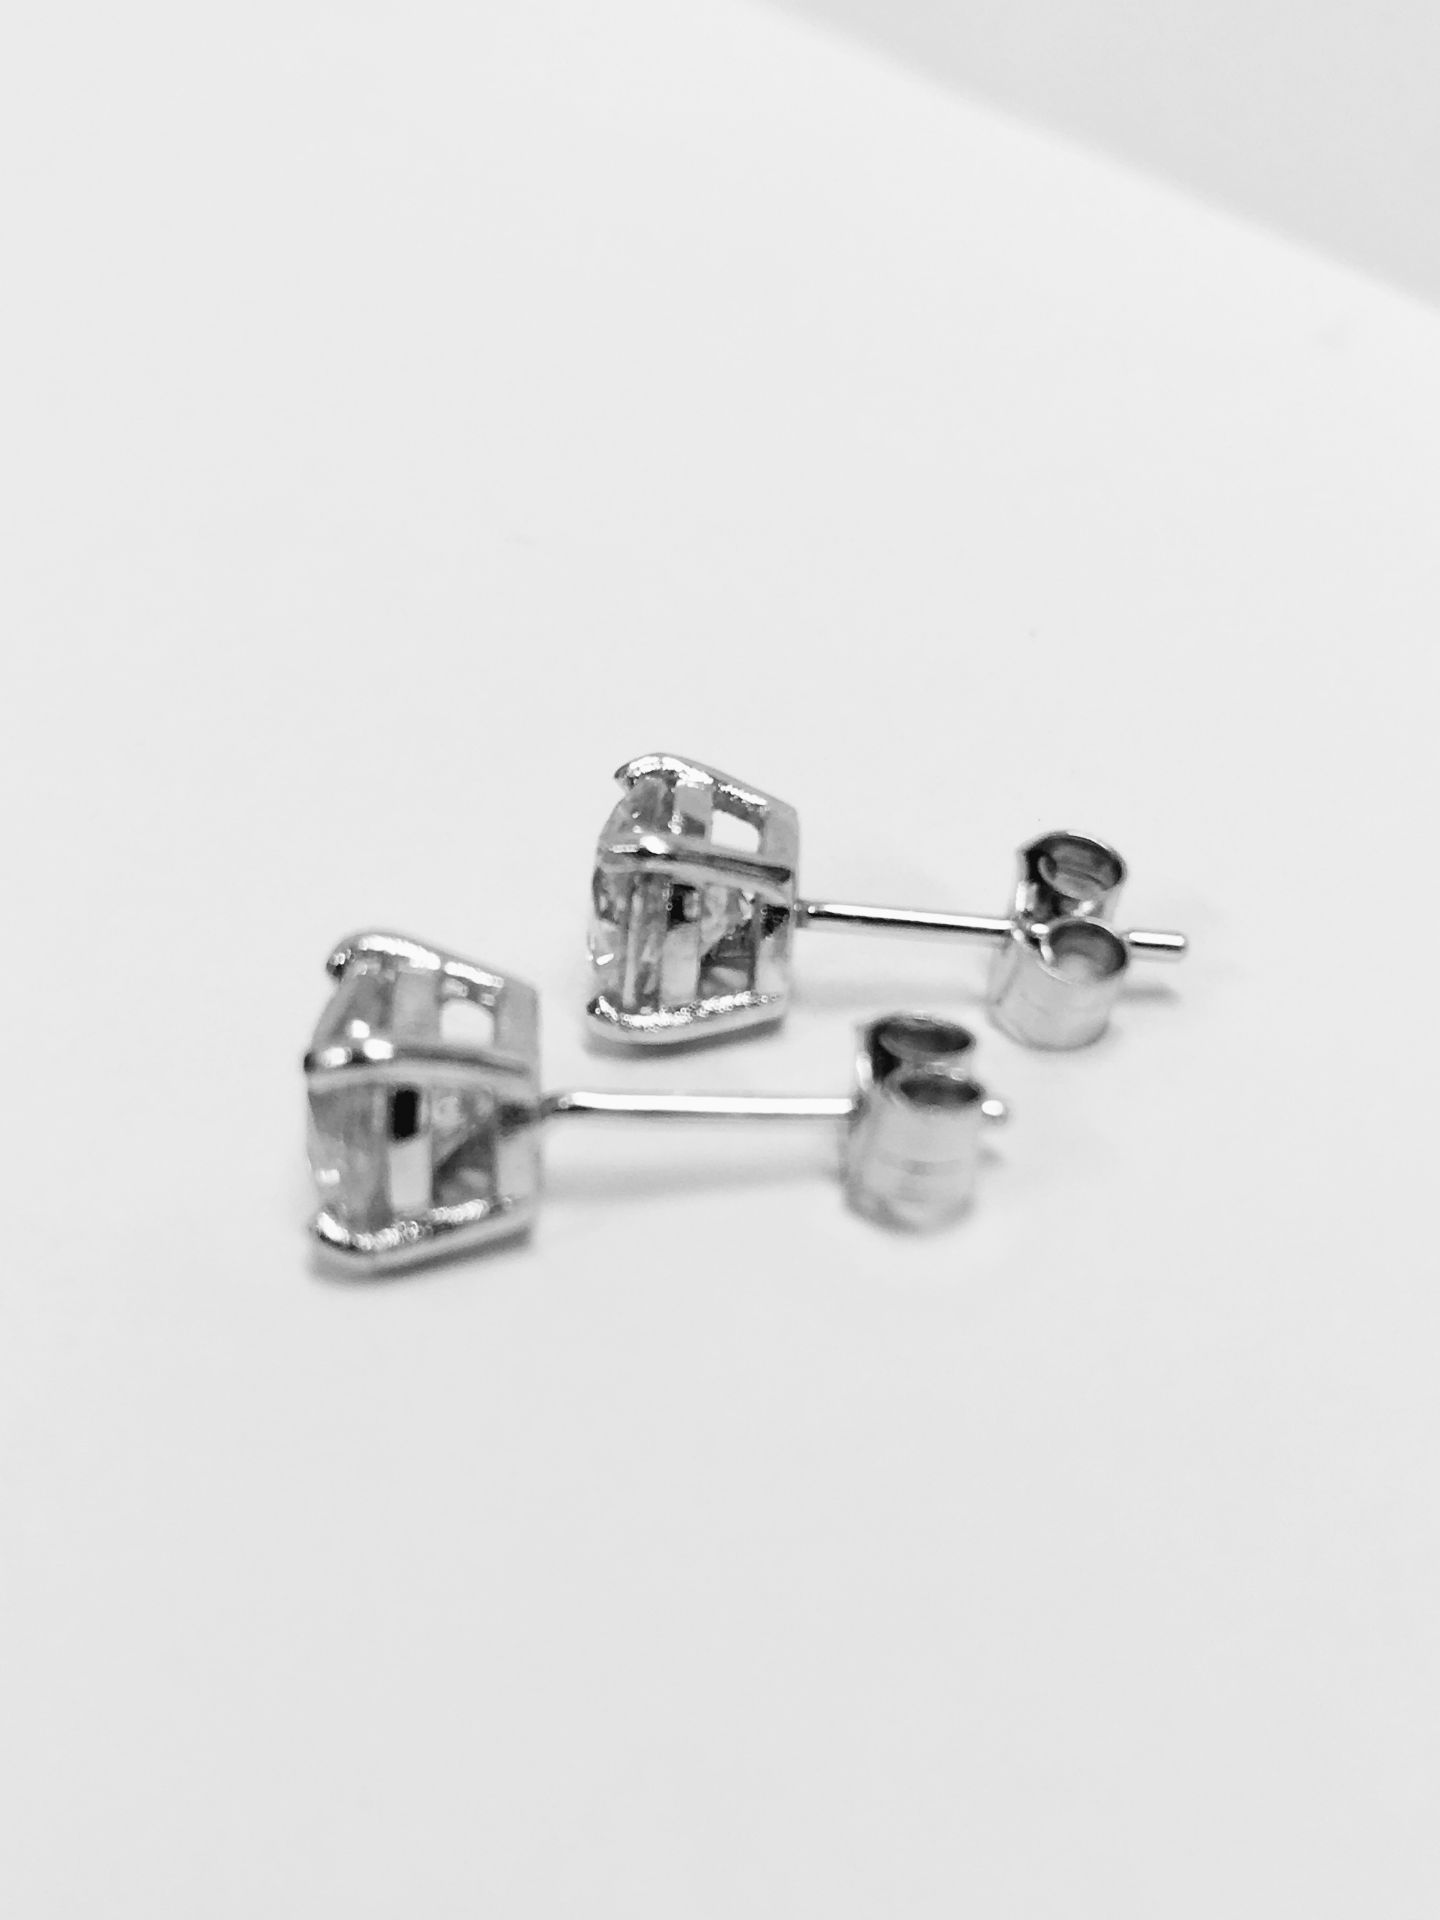 2.00ct Solitaire Diamond Stud Earrings Set With Brilliant Cut Diamonds Which Have Been Enhanced - Image 3 of 3